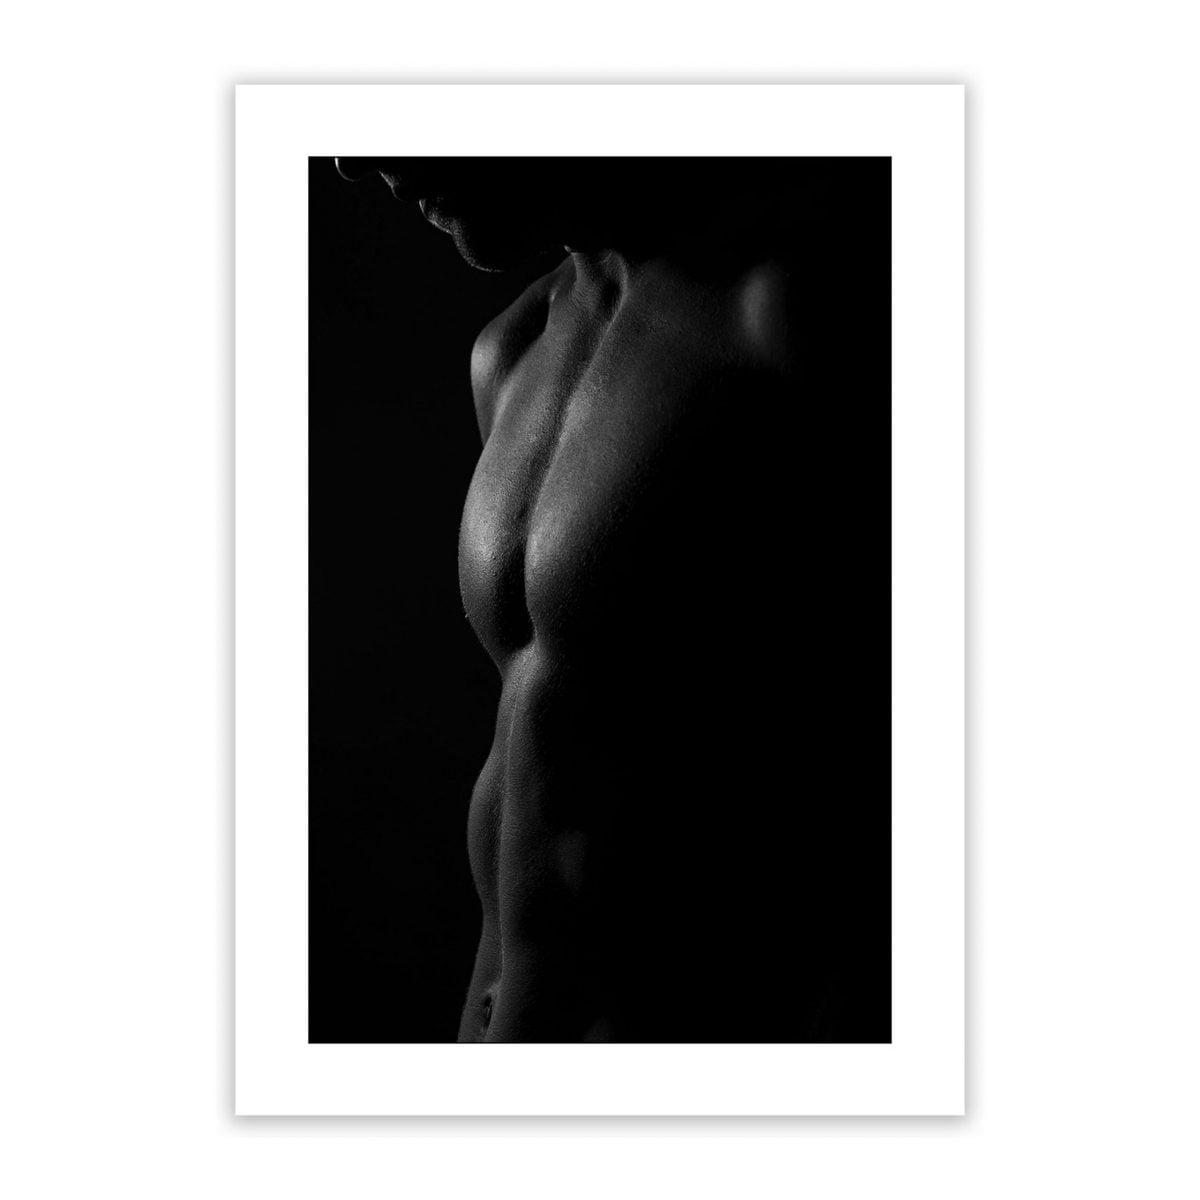 his breath nude erotic wall art prints posters